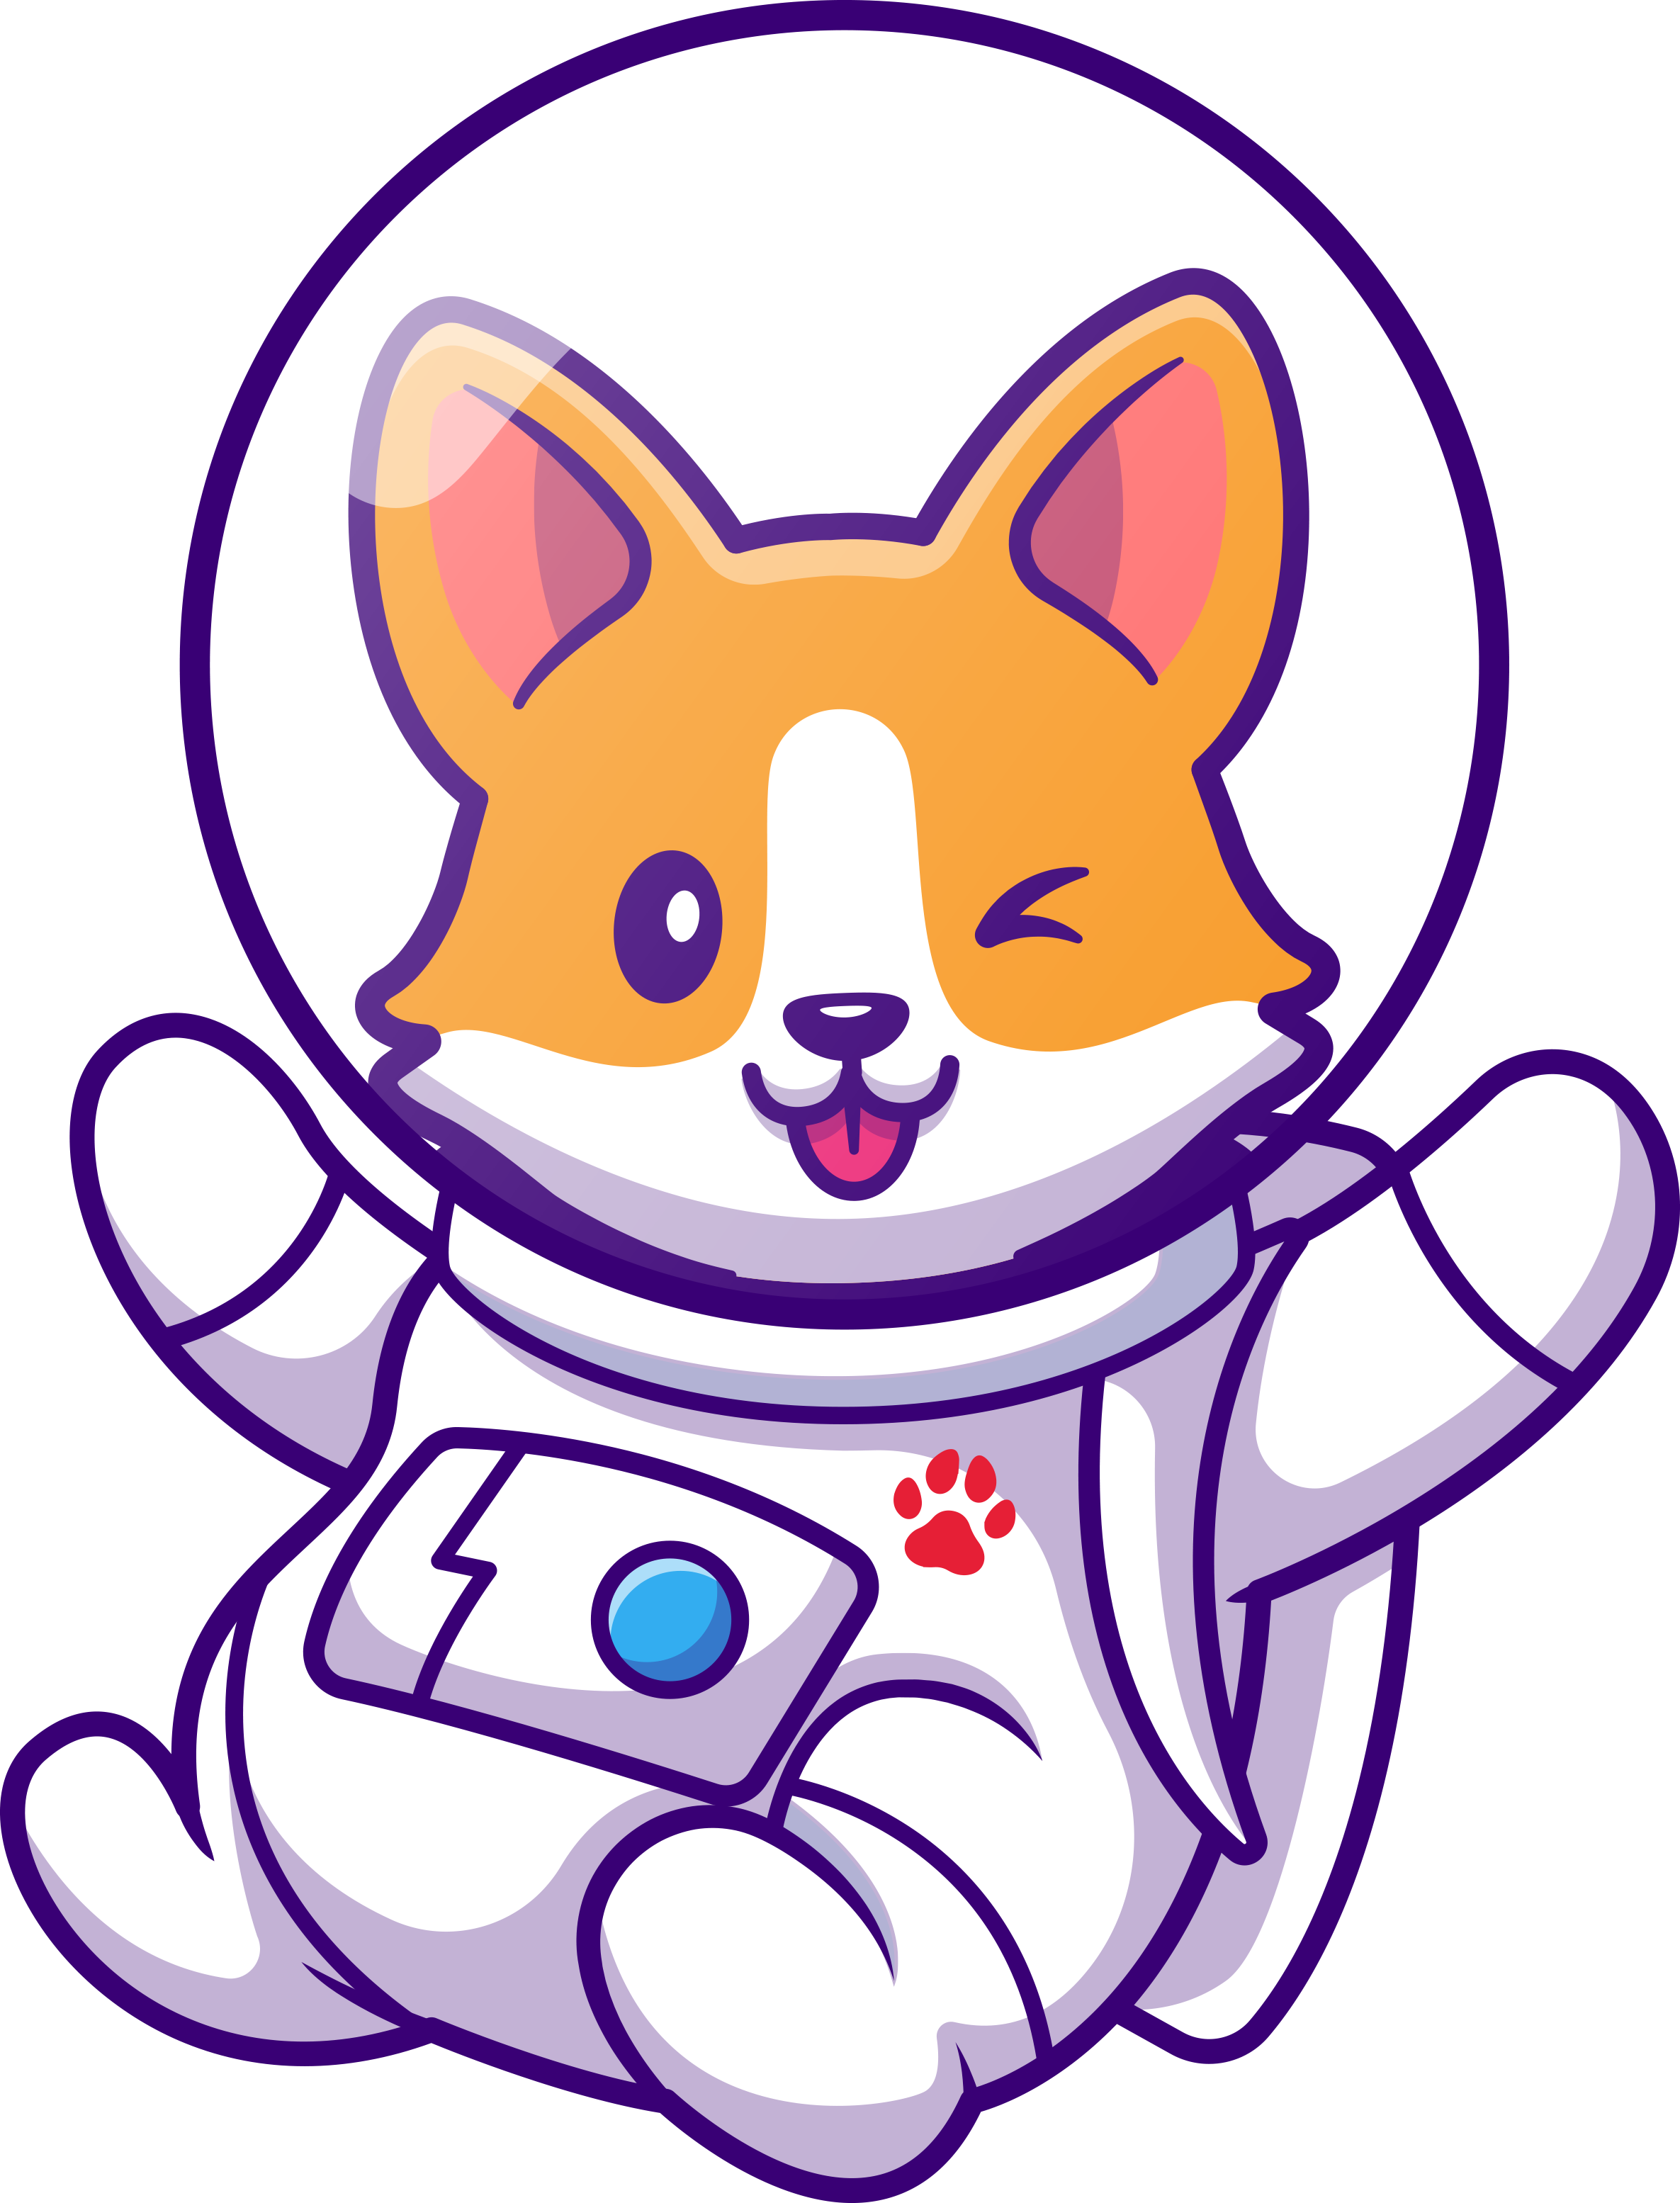 Illustration of a cute corgi wearing a spacesuit and winking.